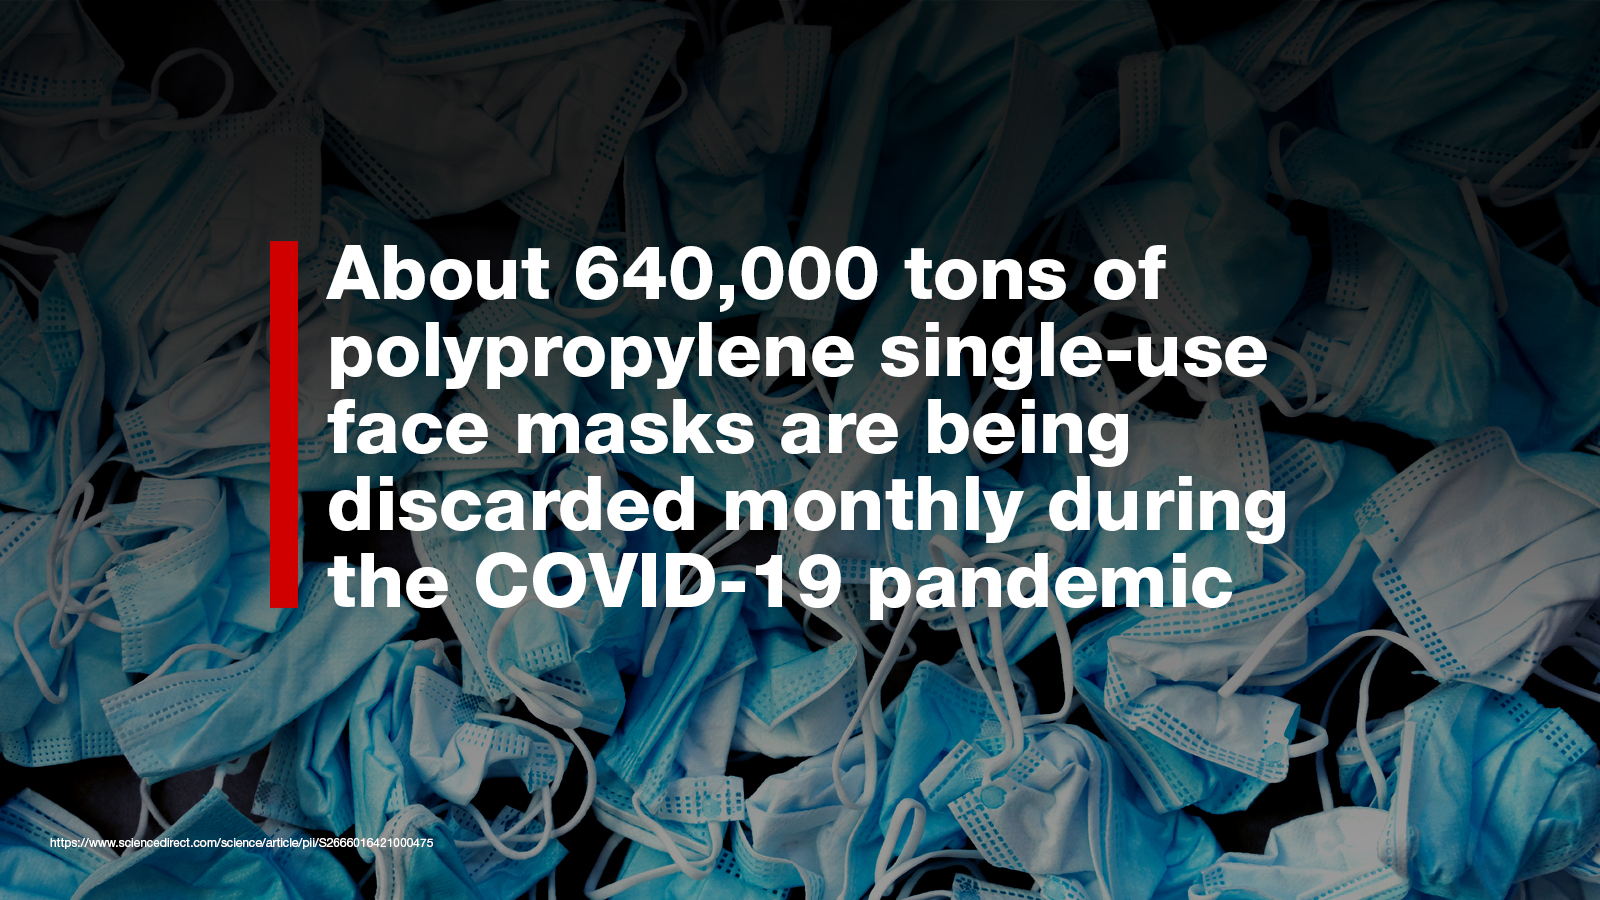 About 640,000 tons of single-use face masks were discarded monthly during the pandemic